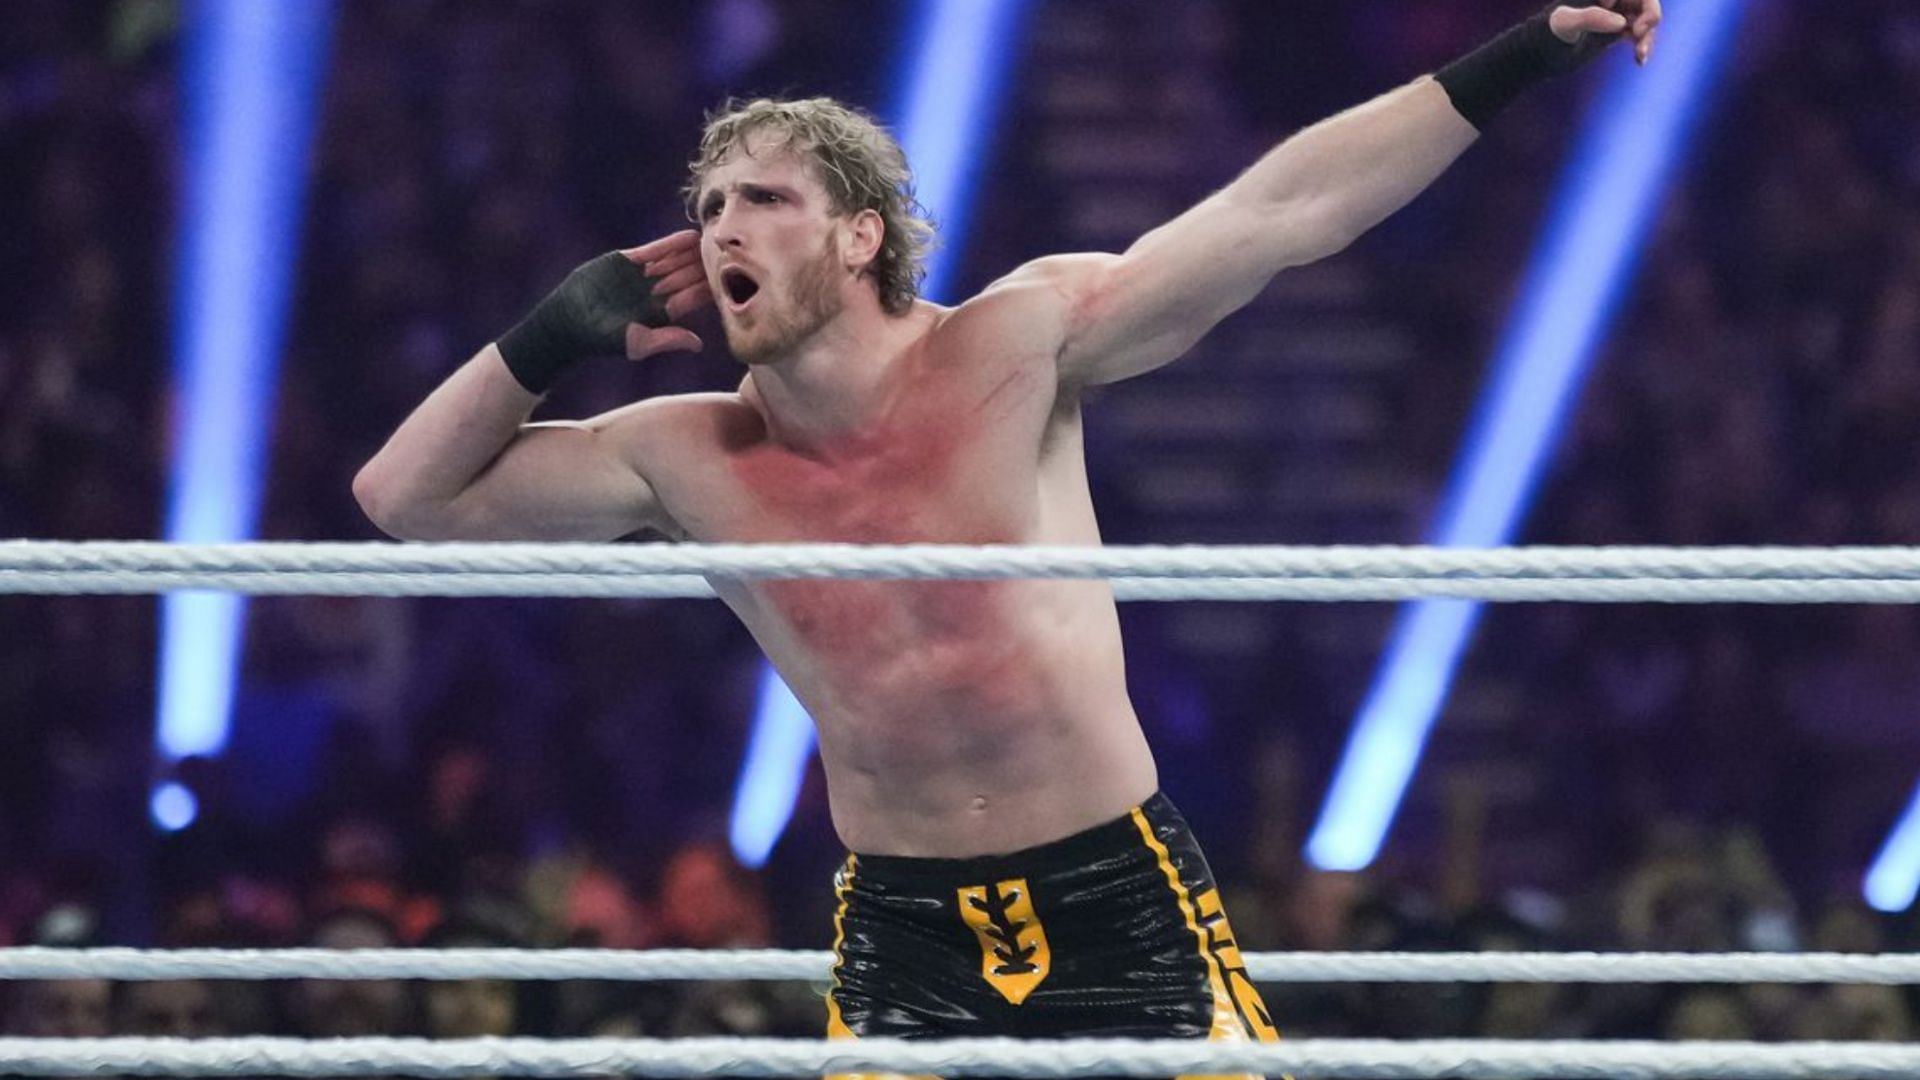 Logan Paul works the crowd at a WWE event.